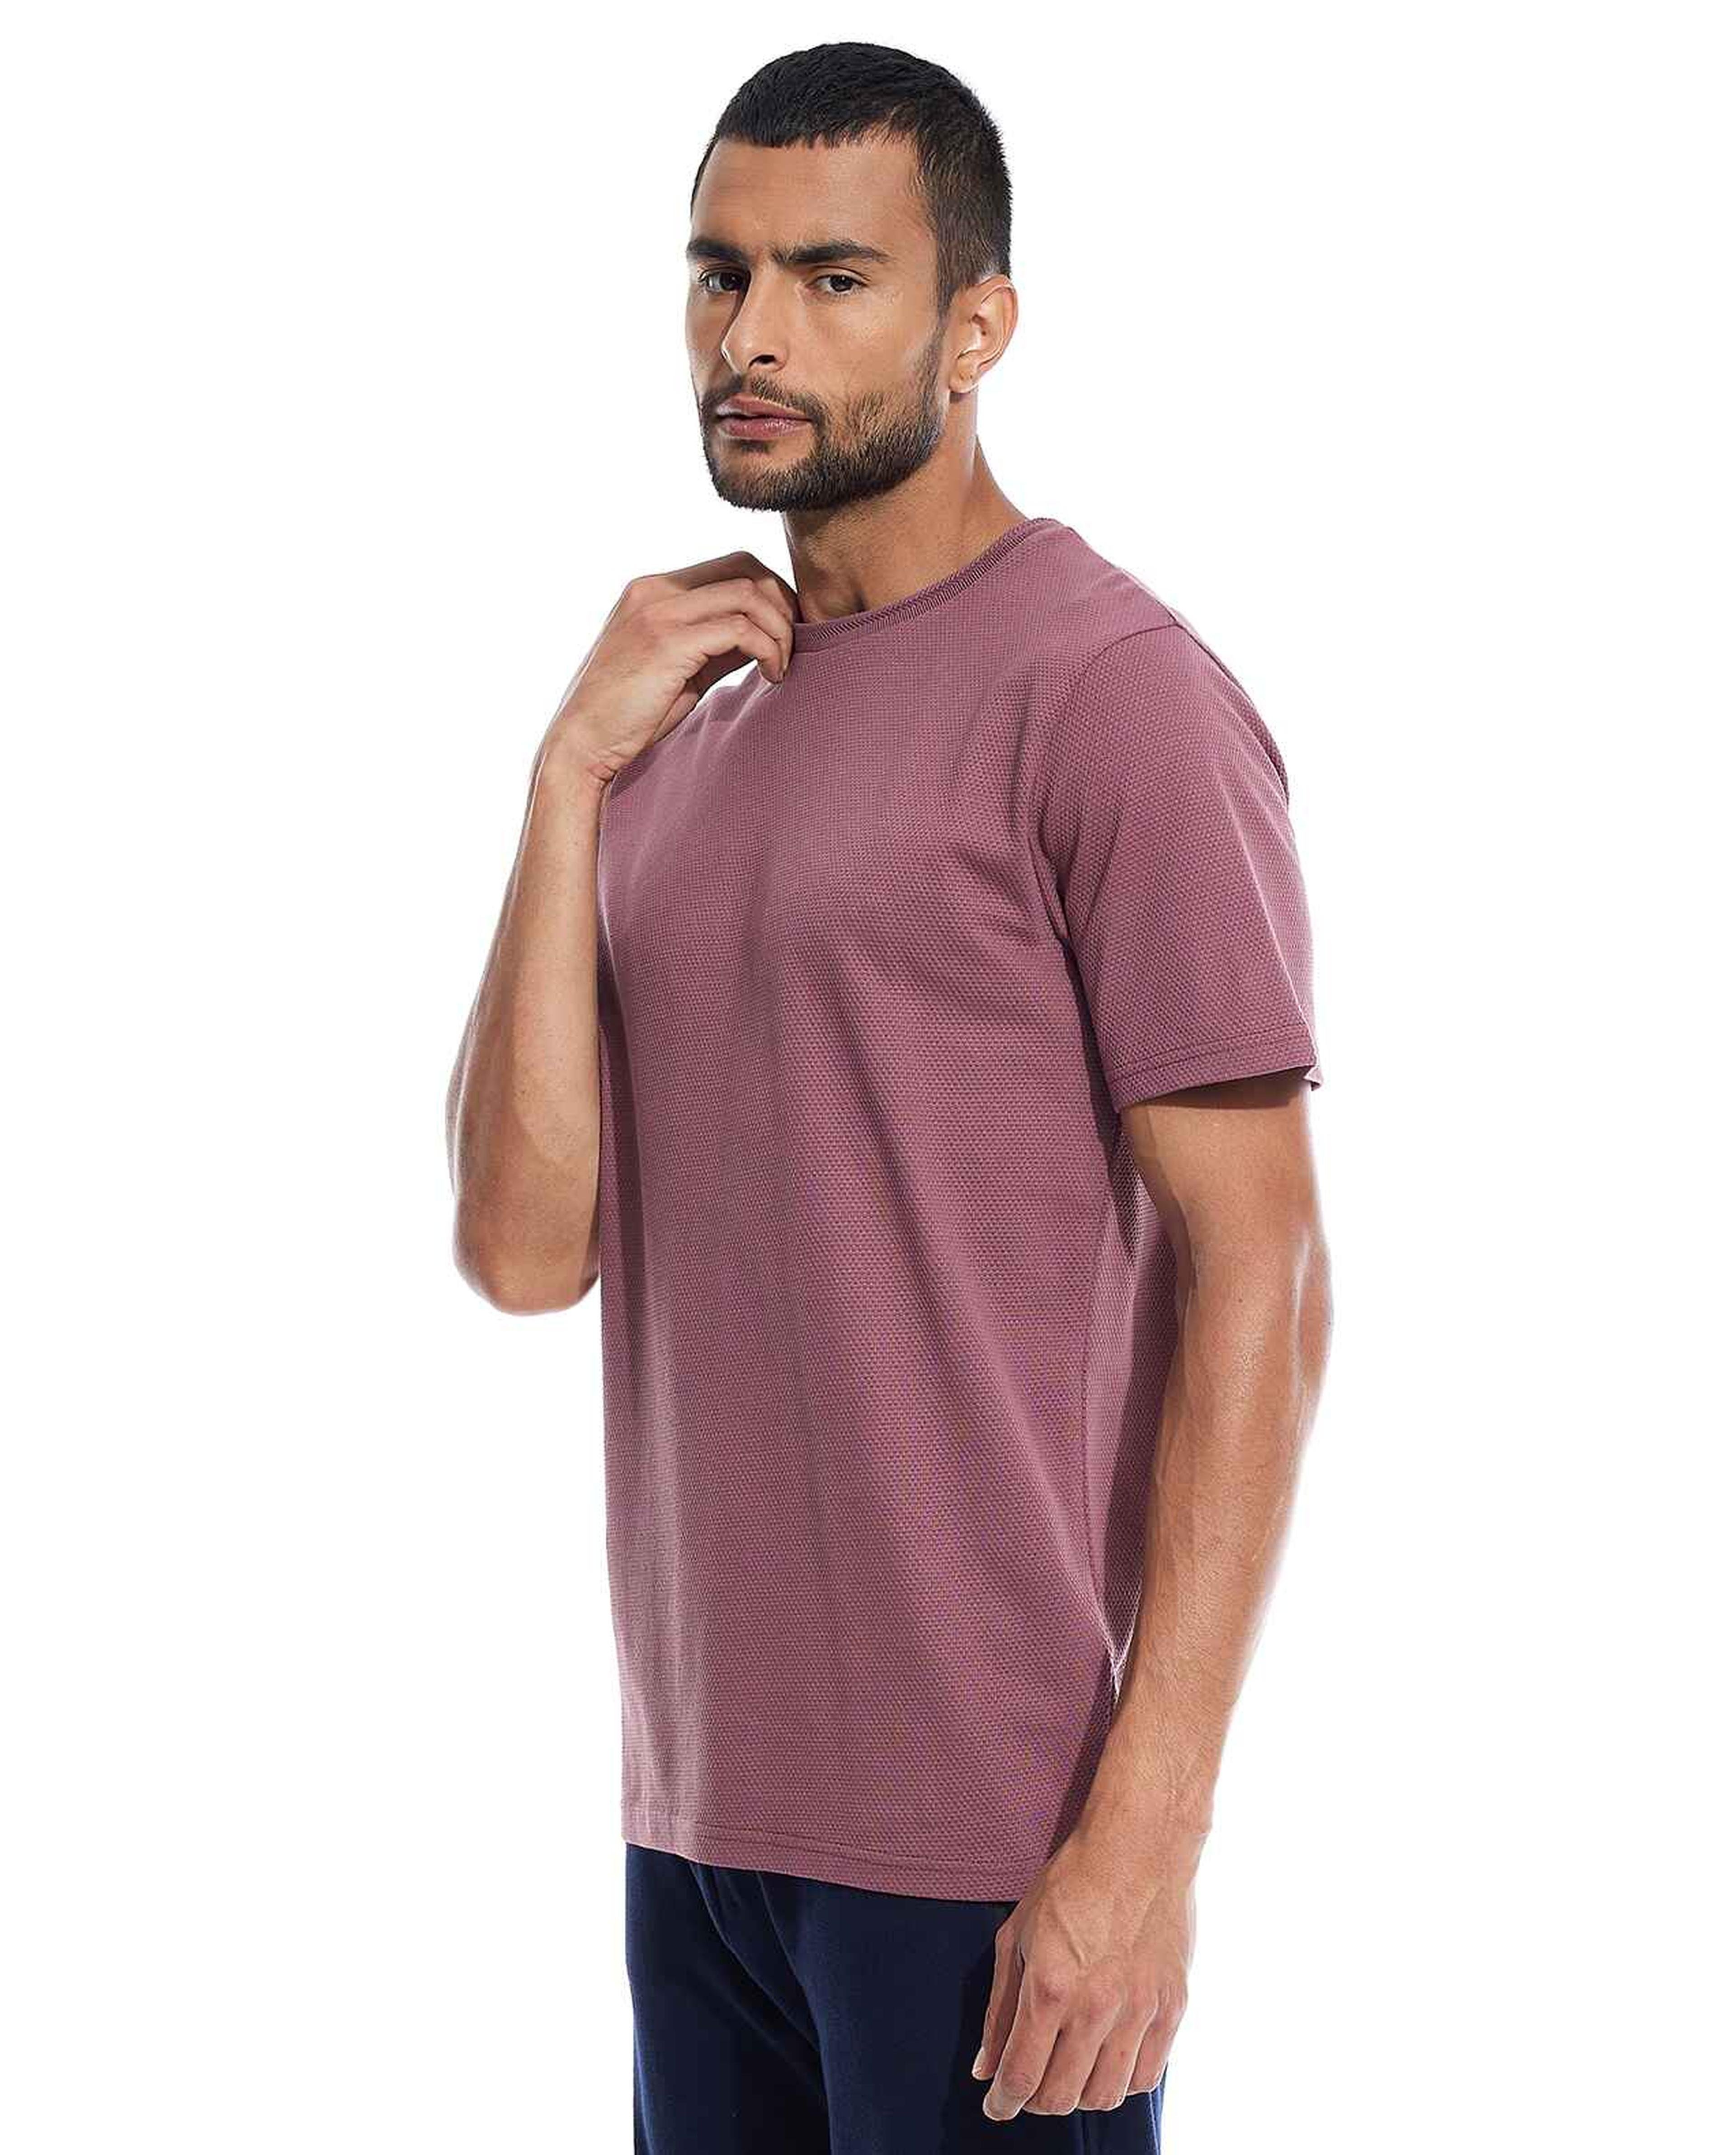 Textured T-Shirt with Crew Neck and Short Sleeves